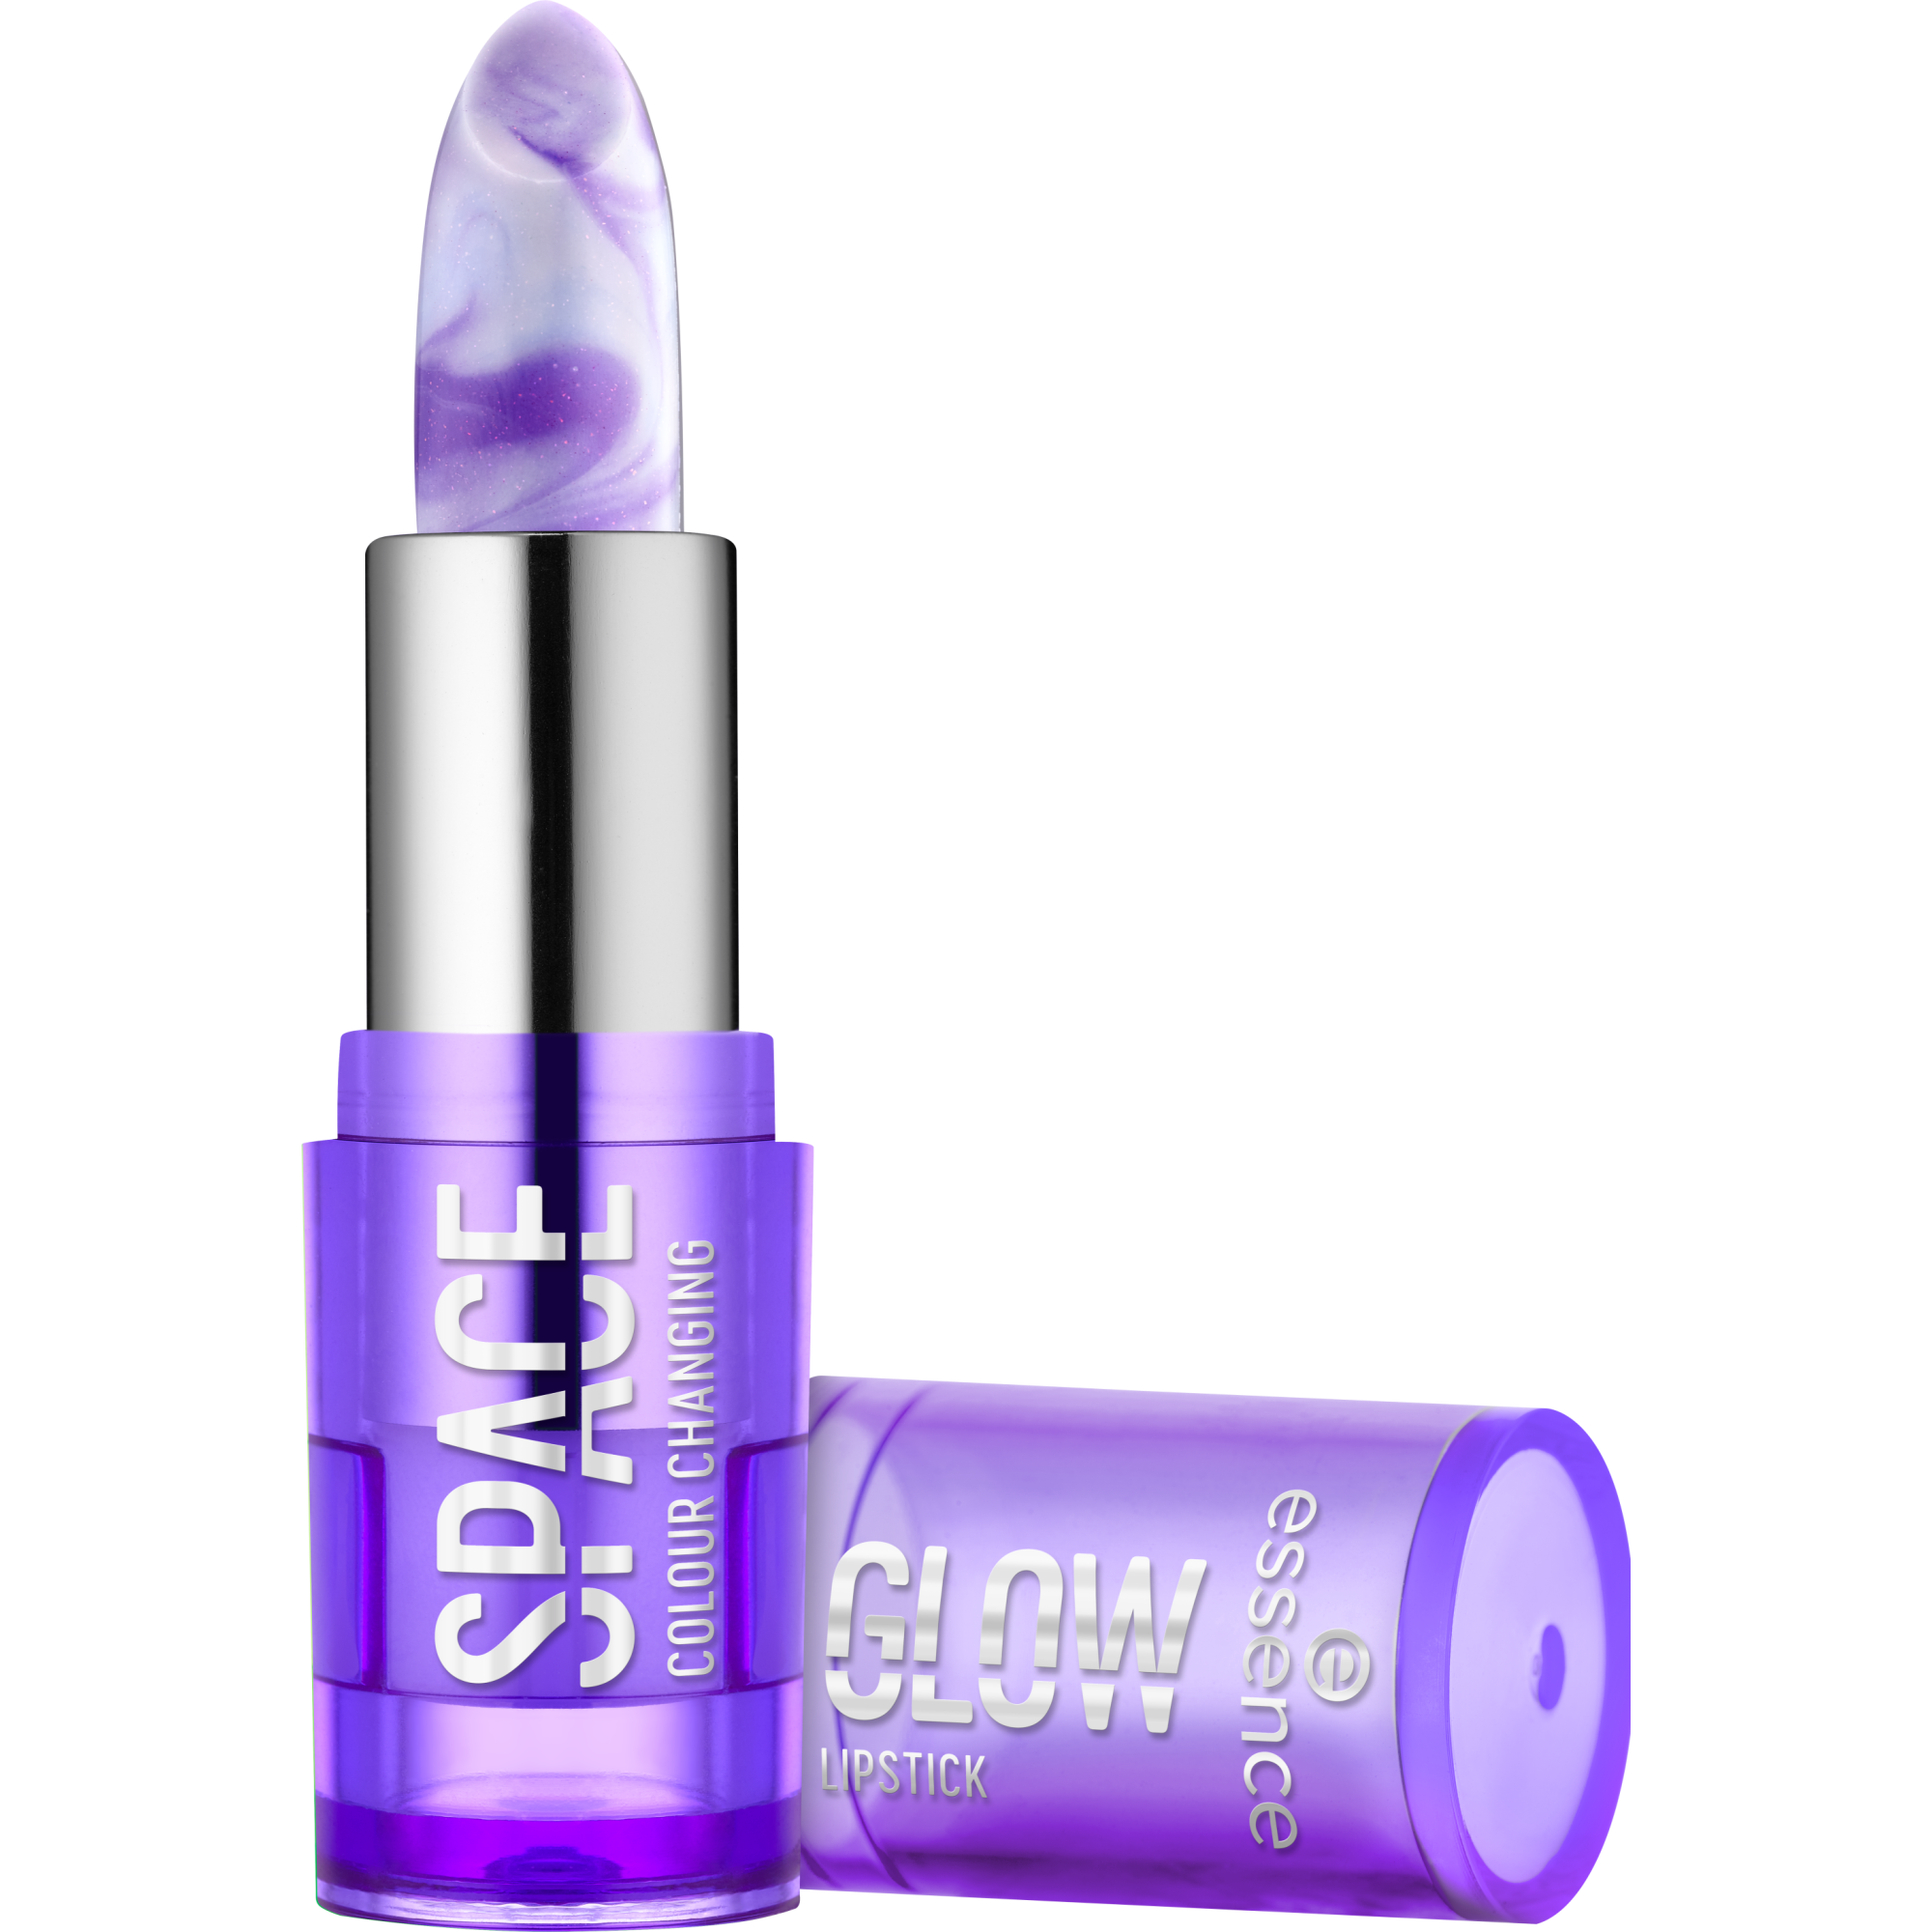 SPACE GLOW COLOUR CHANGING LIPSTICK